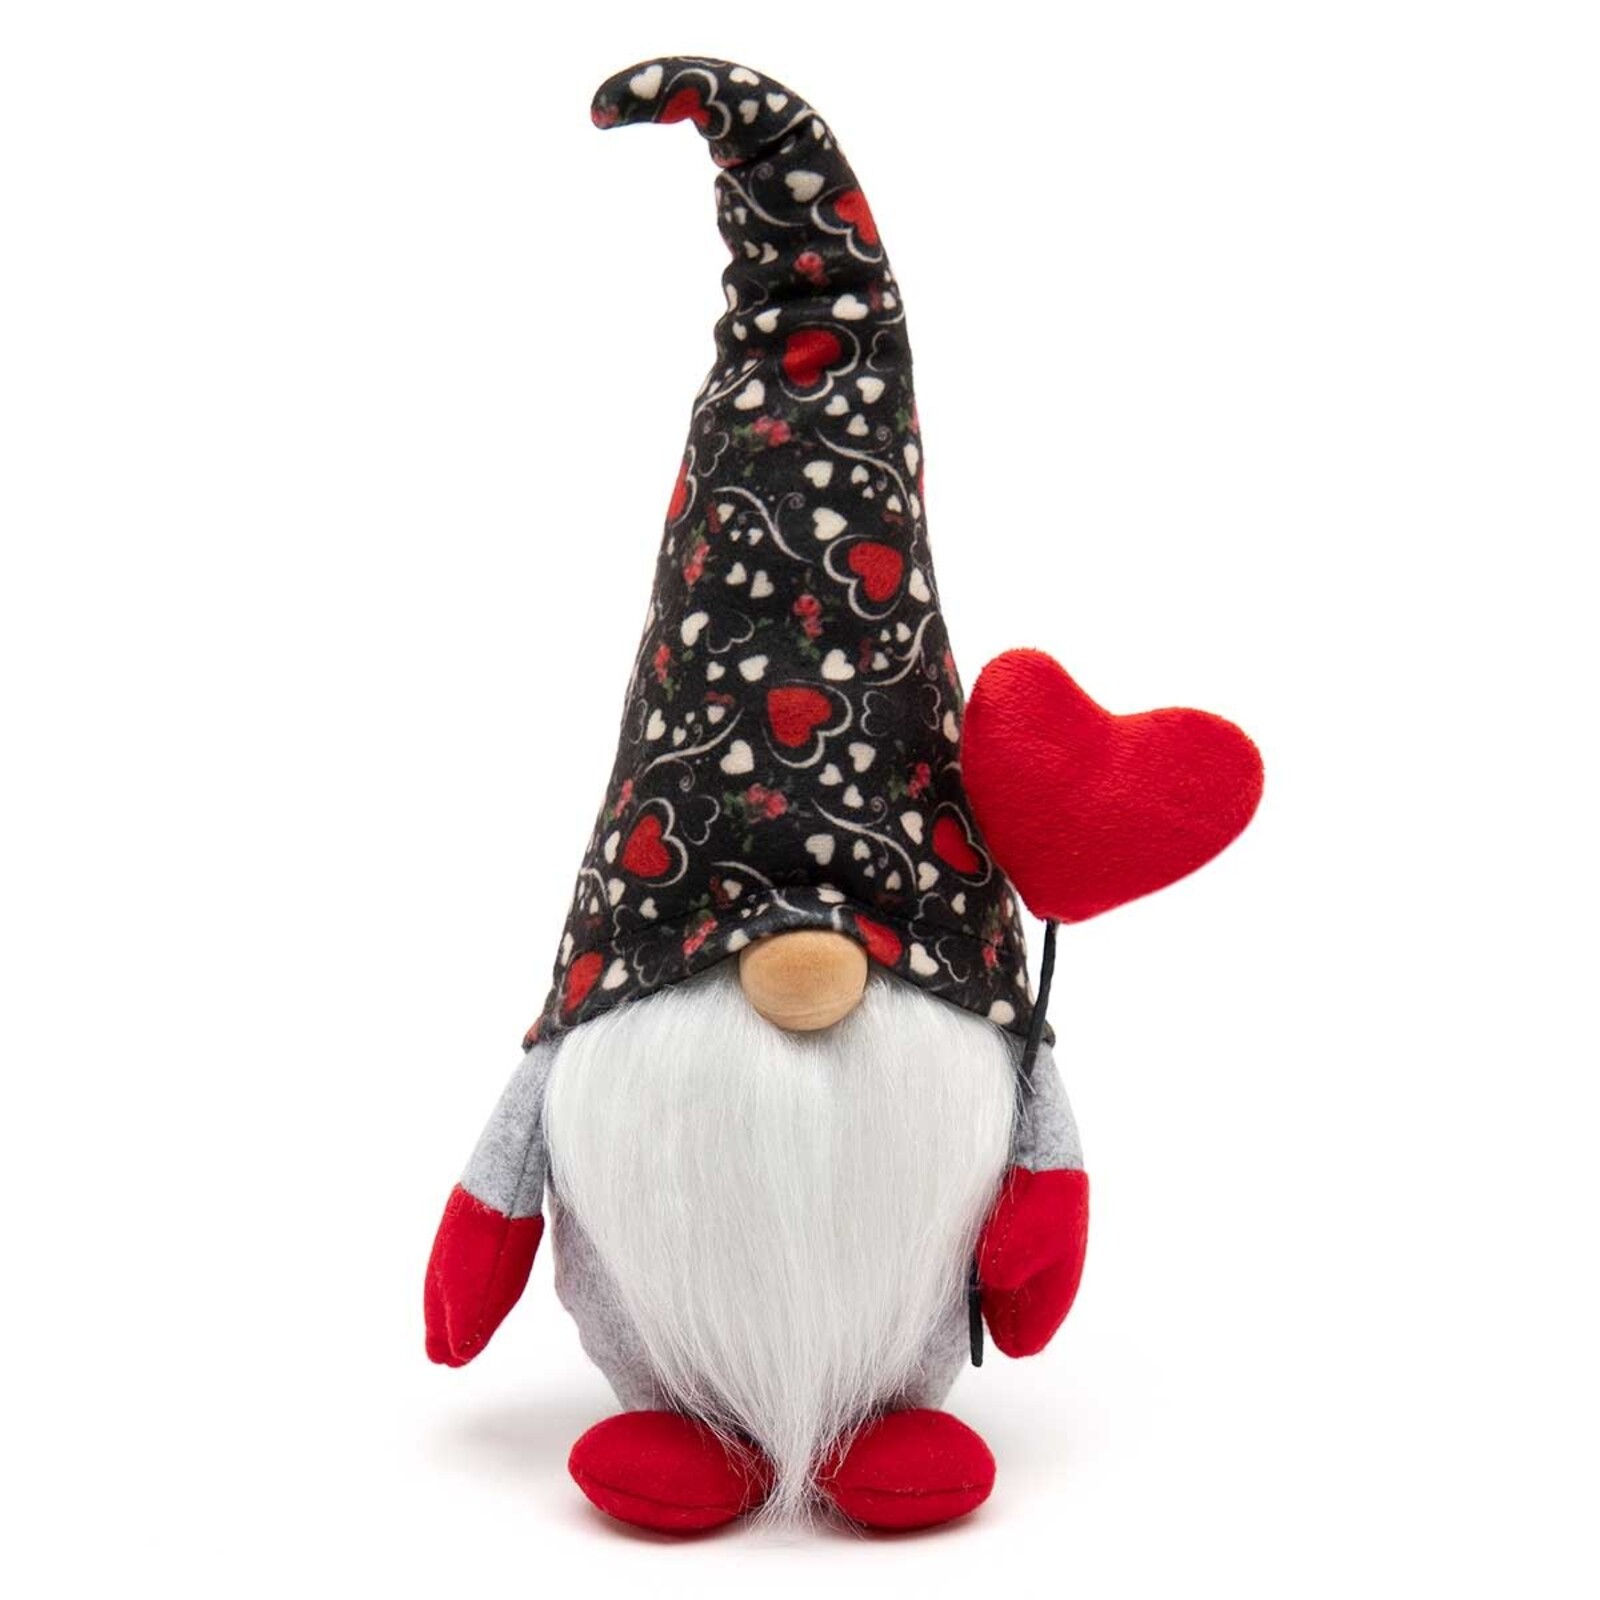 Meravic Valentino Gnome with Heart, Wood Nose 13.5" Lg  T4255 loading=